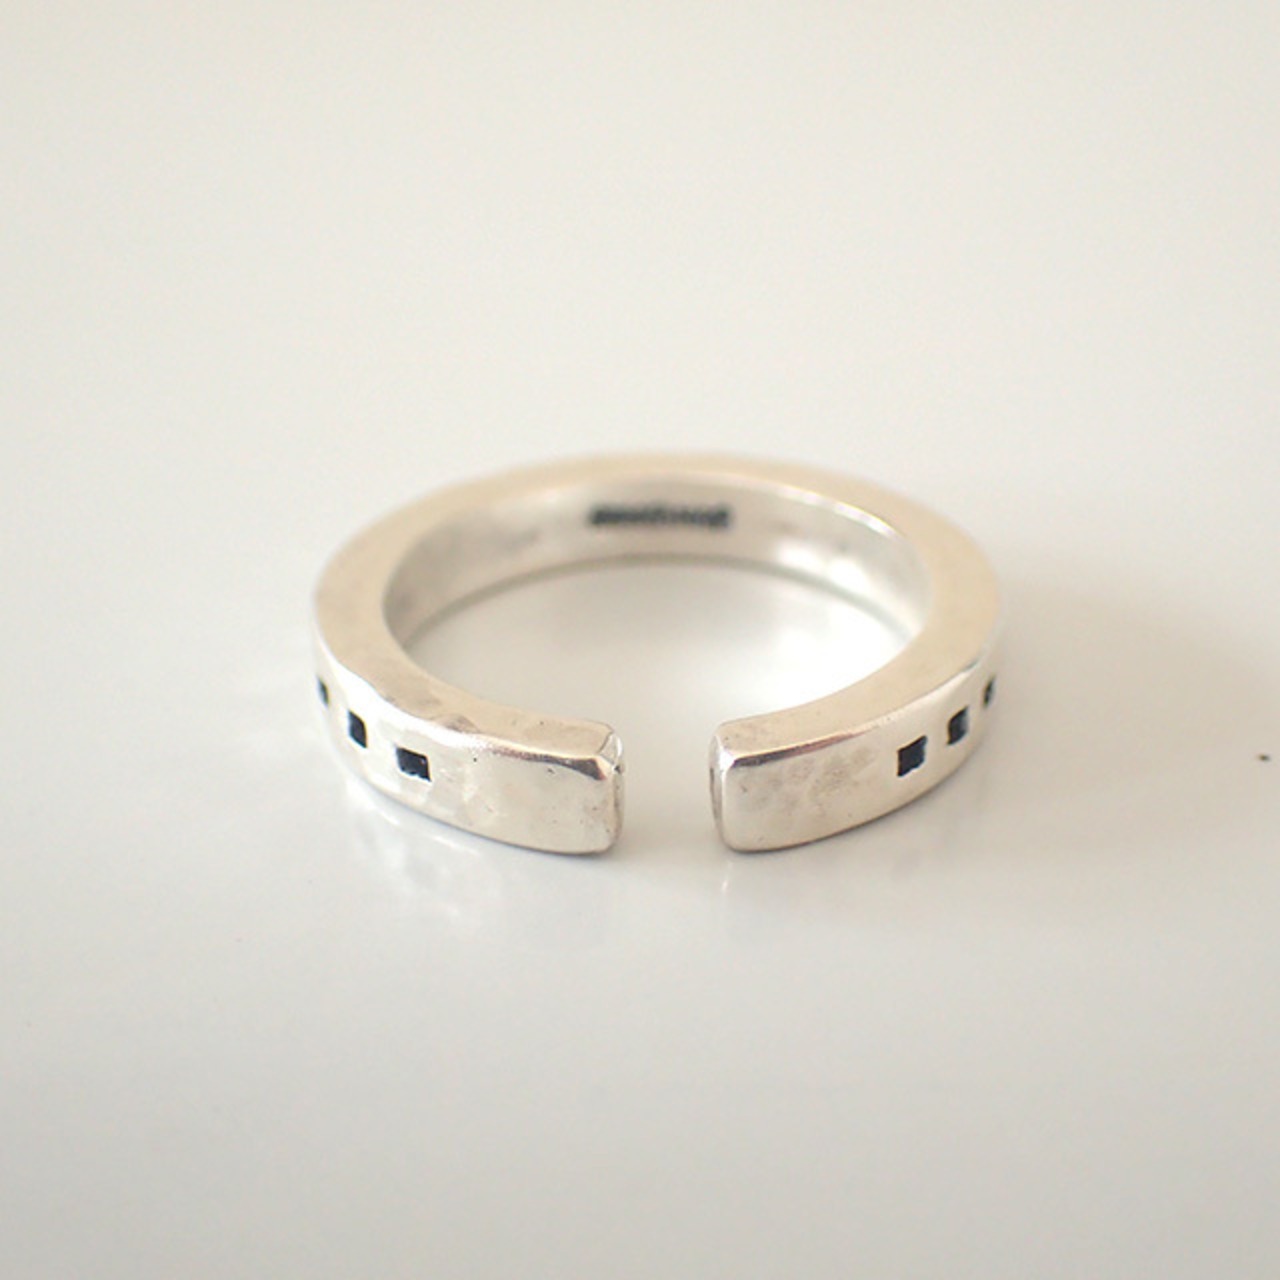 Hole Square Ring